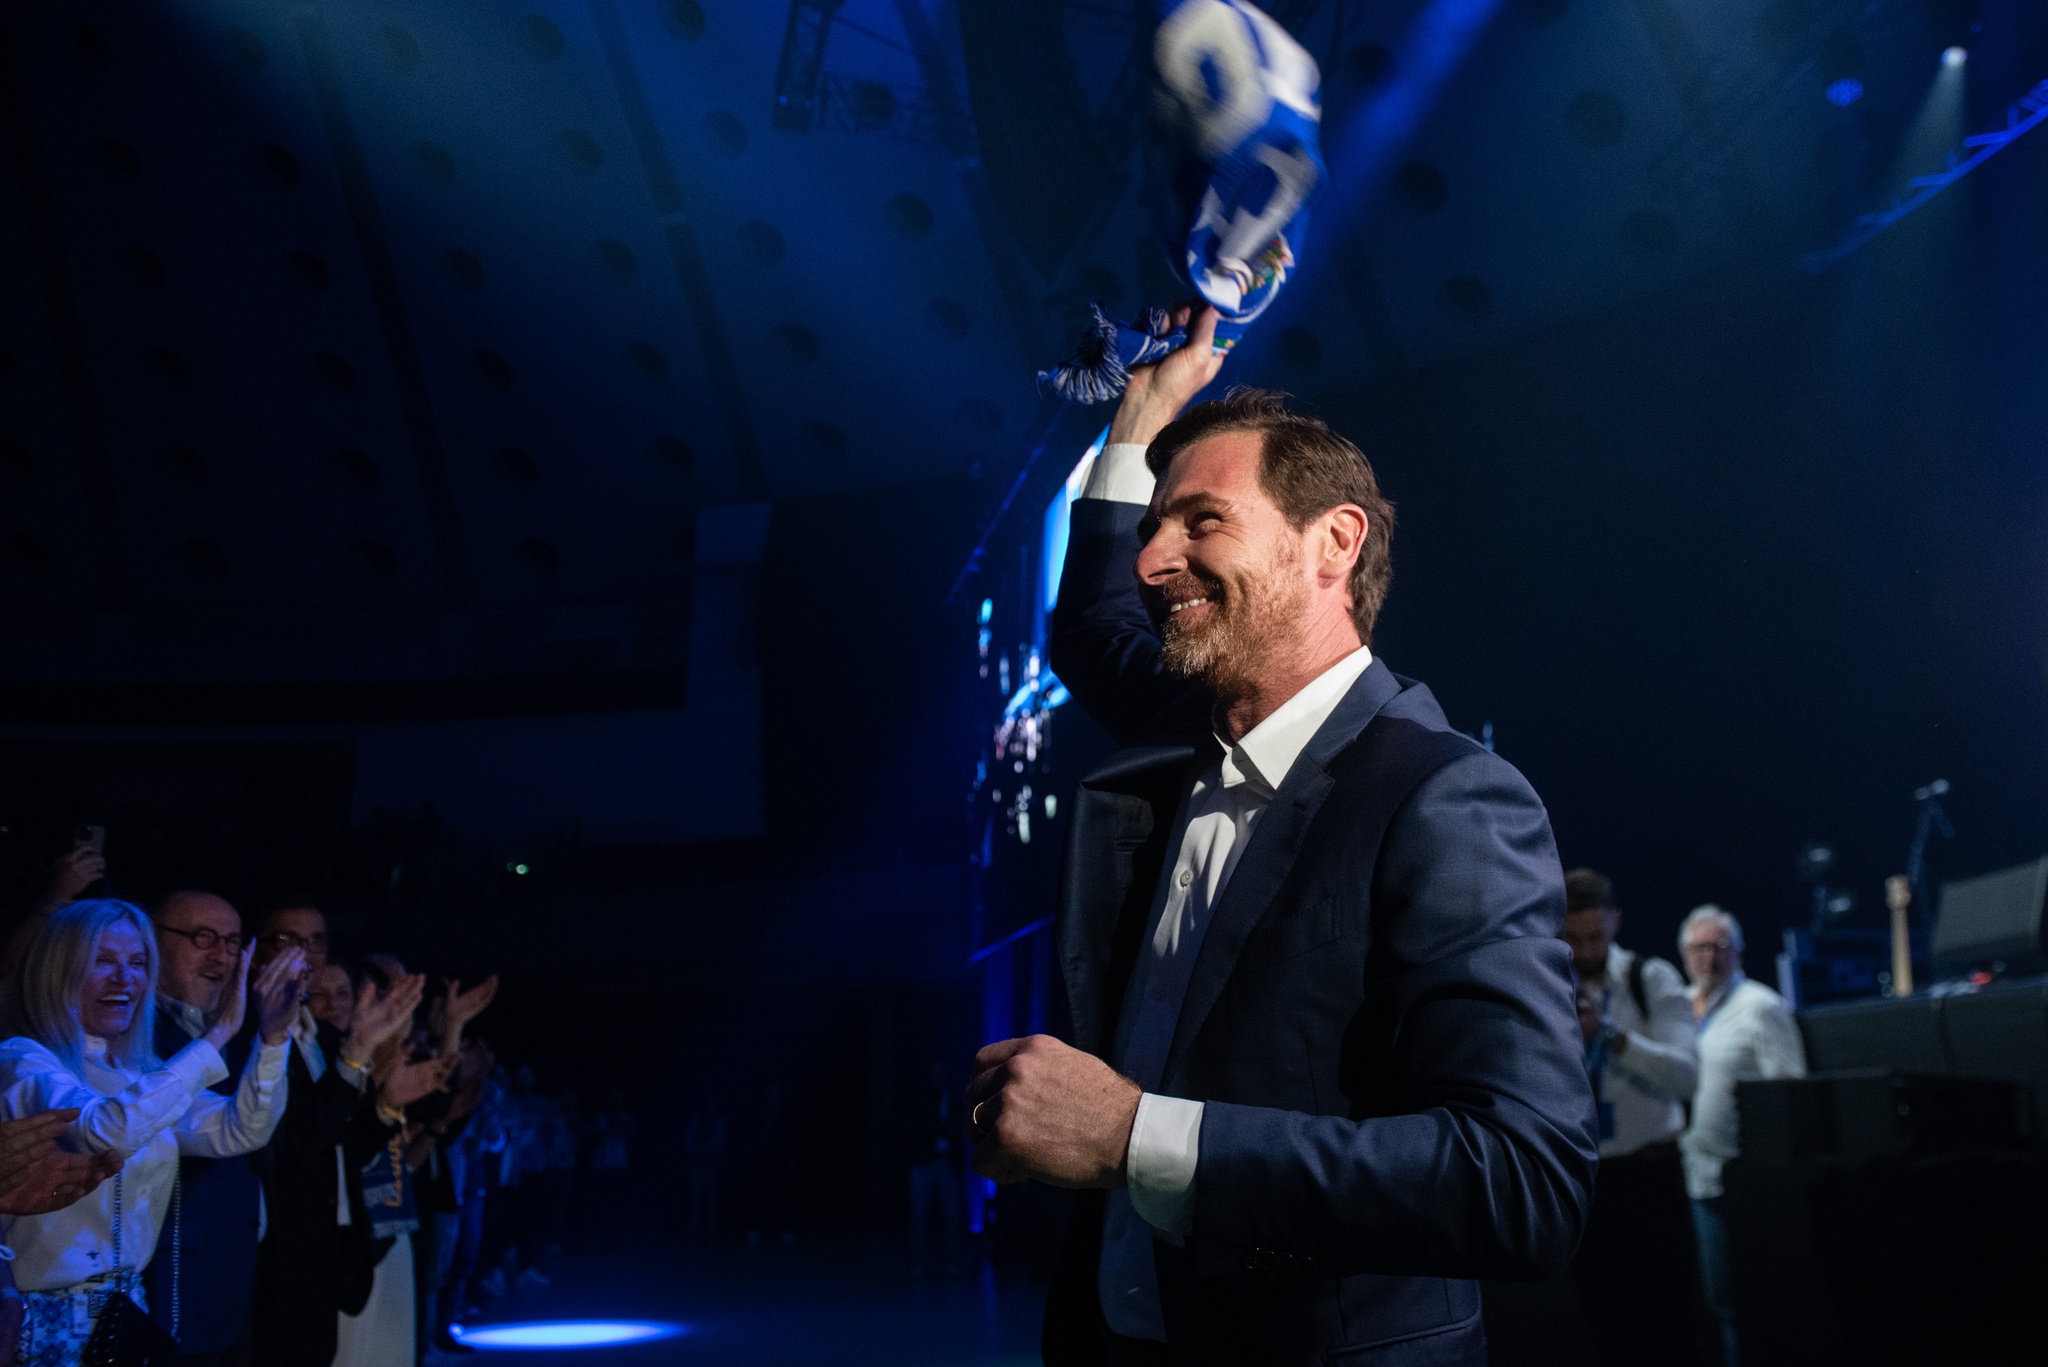 FC Porto Election Campaign: André Villas-Boas Calls for Freedom and Transparency